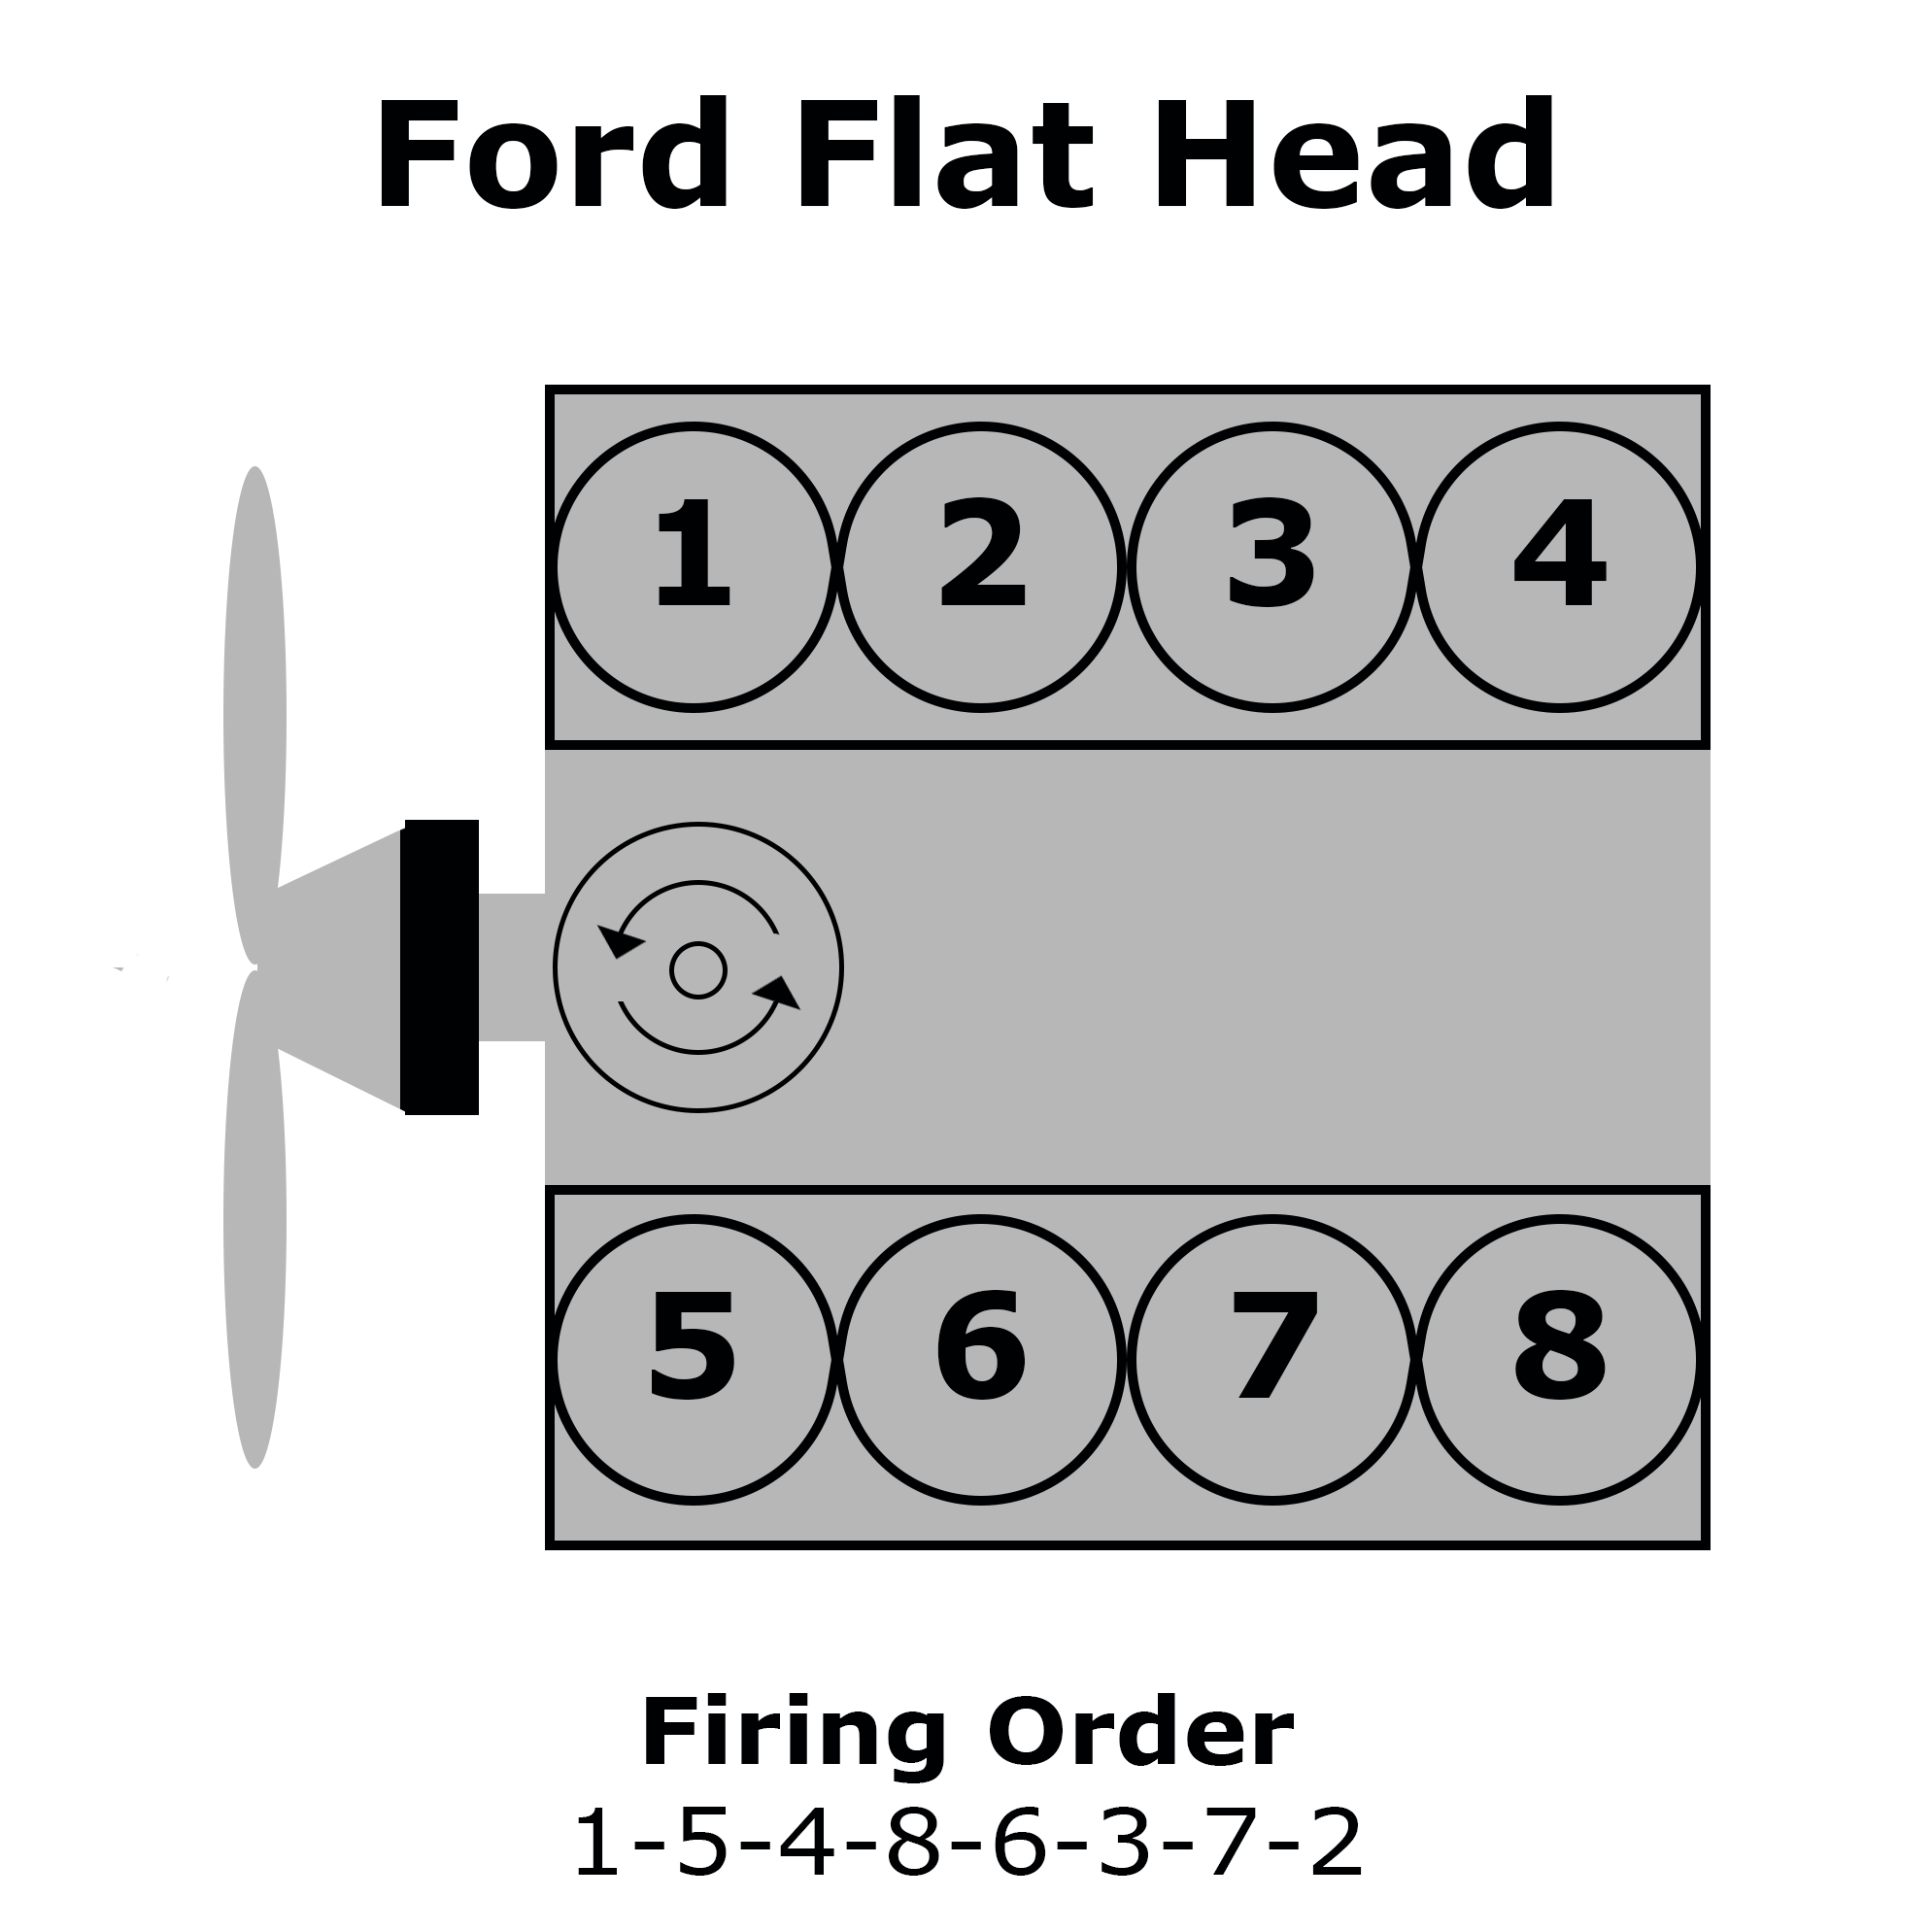 Ford Flat Head Cylinder Numbering, Distributor Rotation, and Firing Order